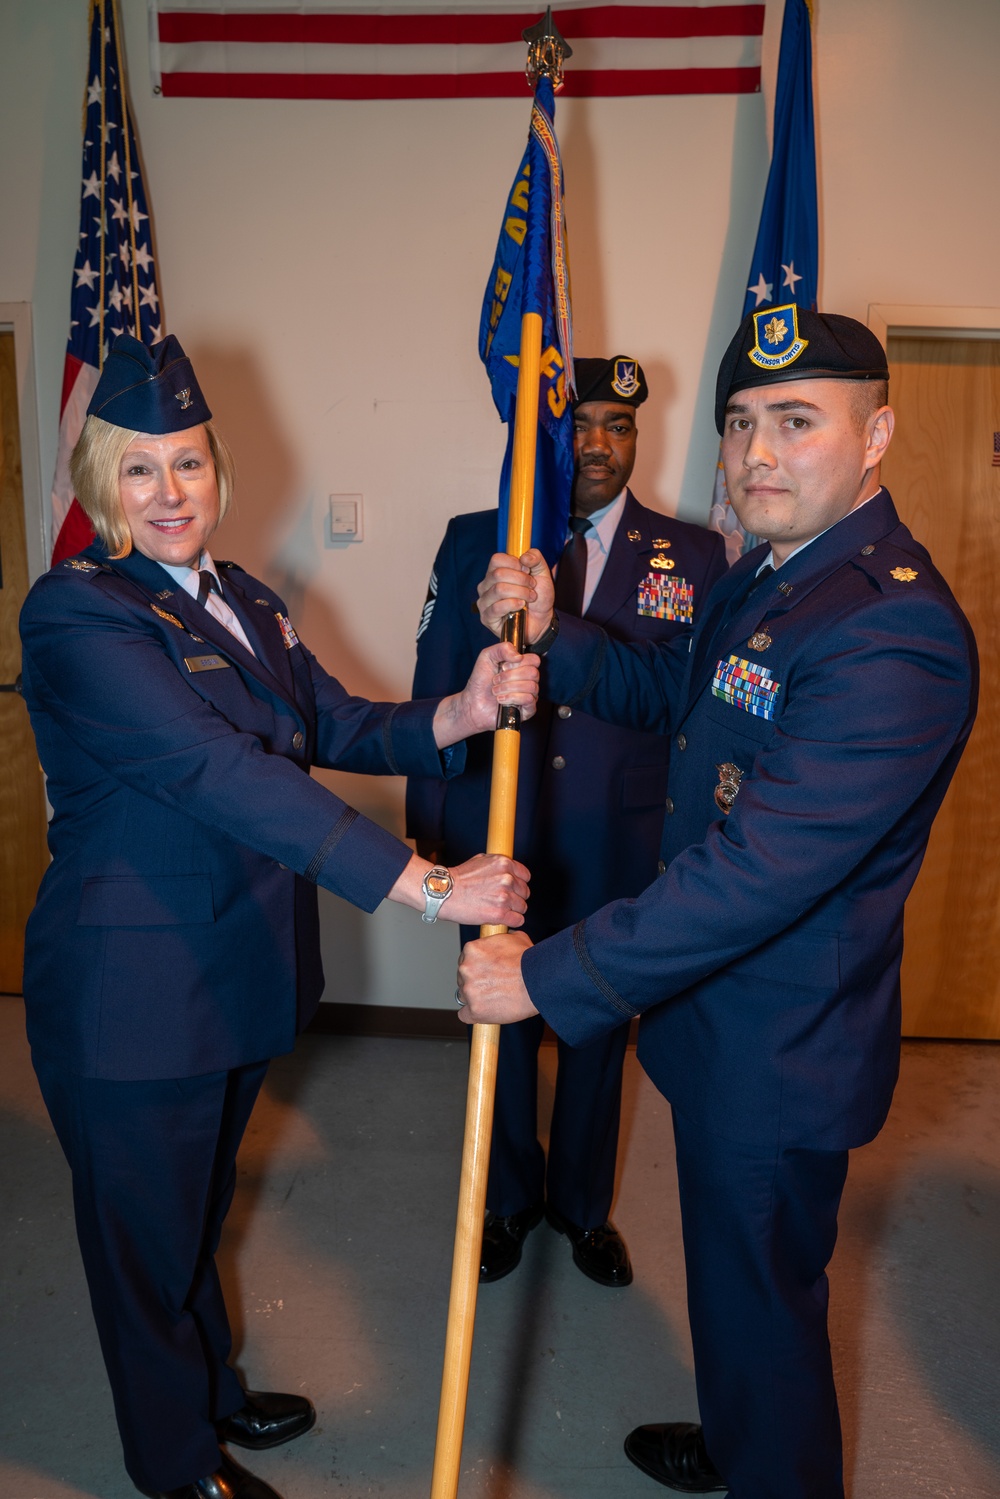 Lowe assumes command of 459 SFS